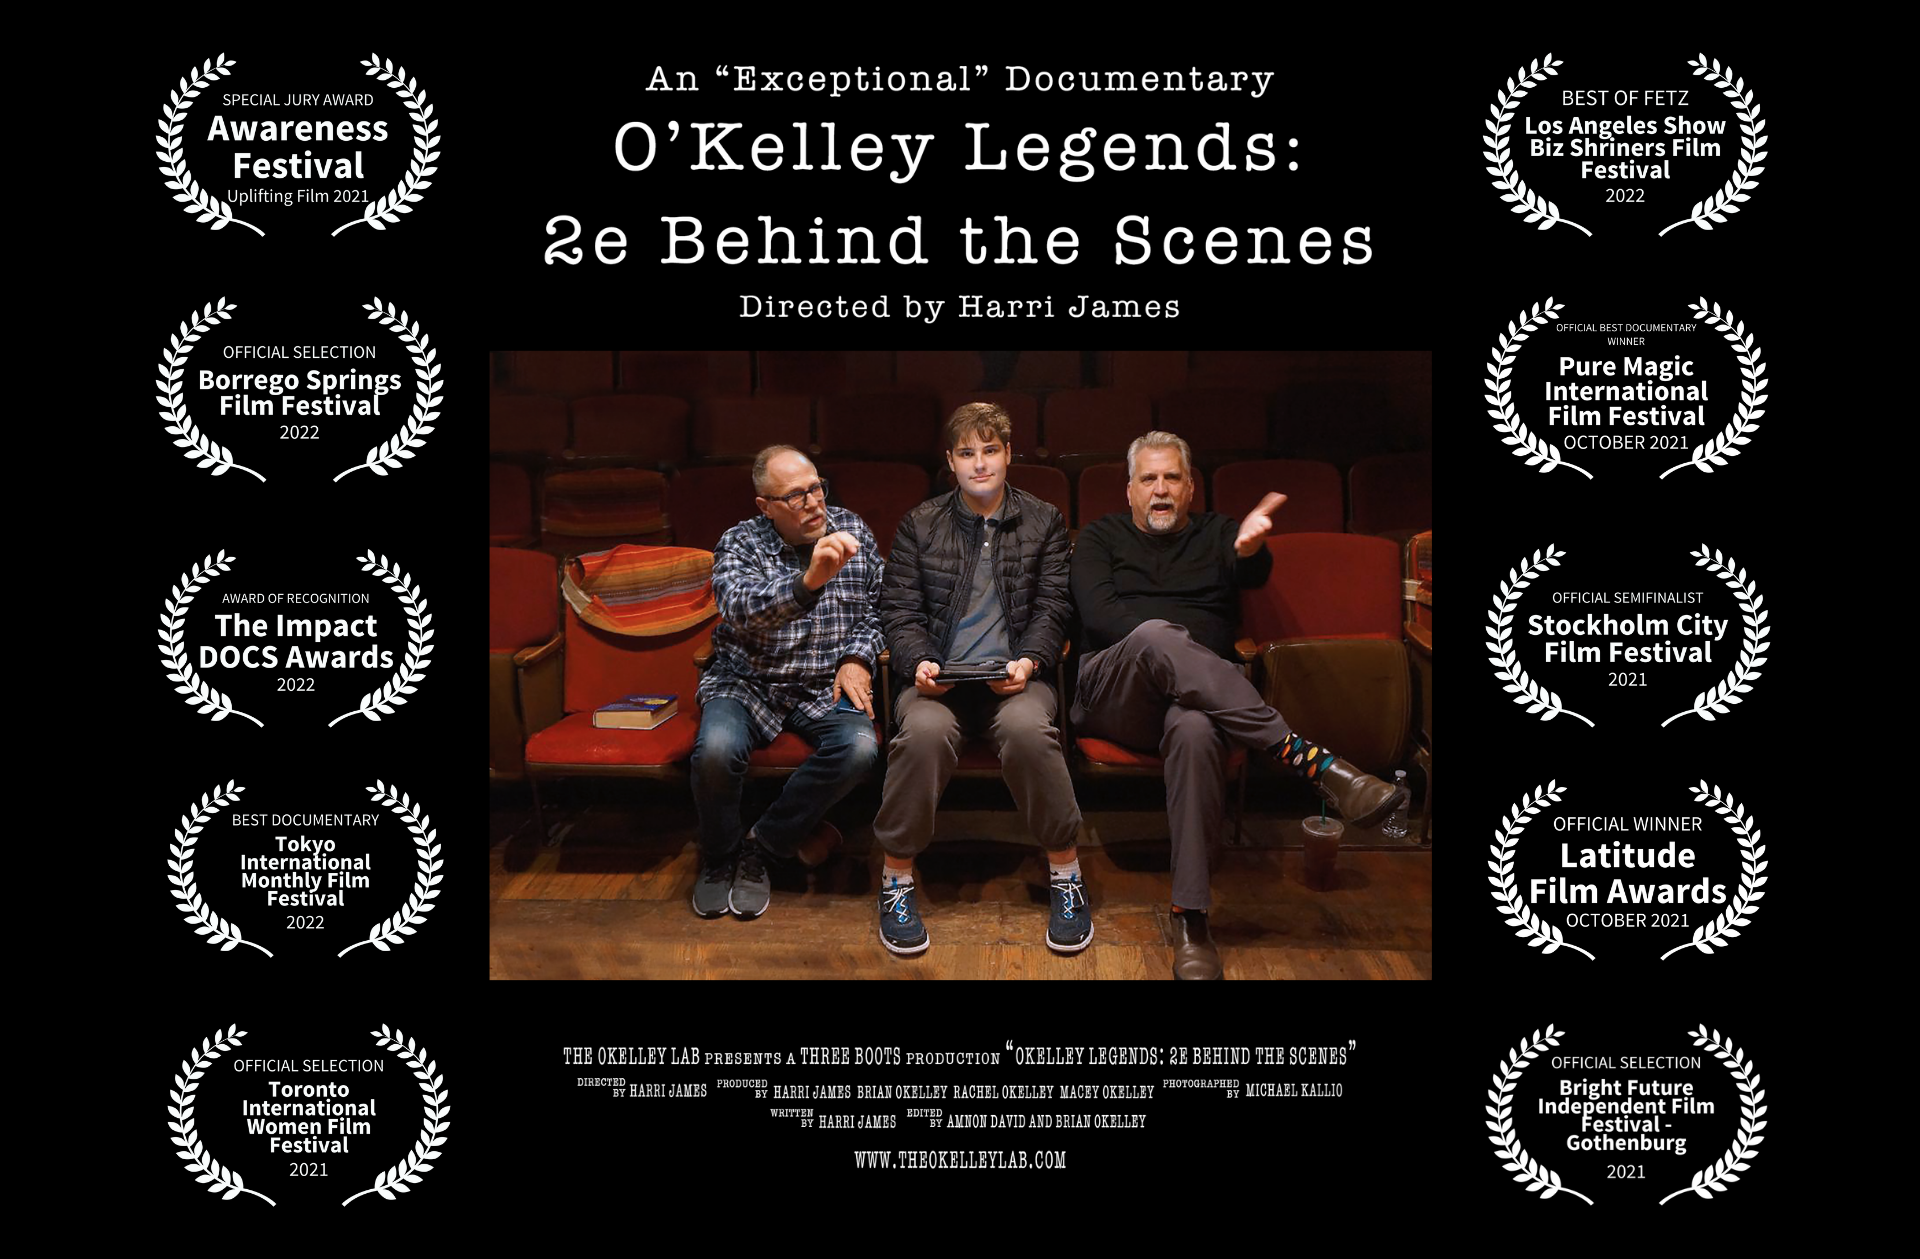 The OKelley Legend 2e Behind the Scene